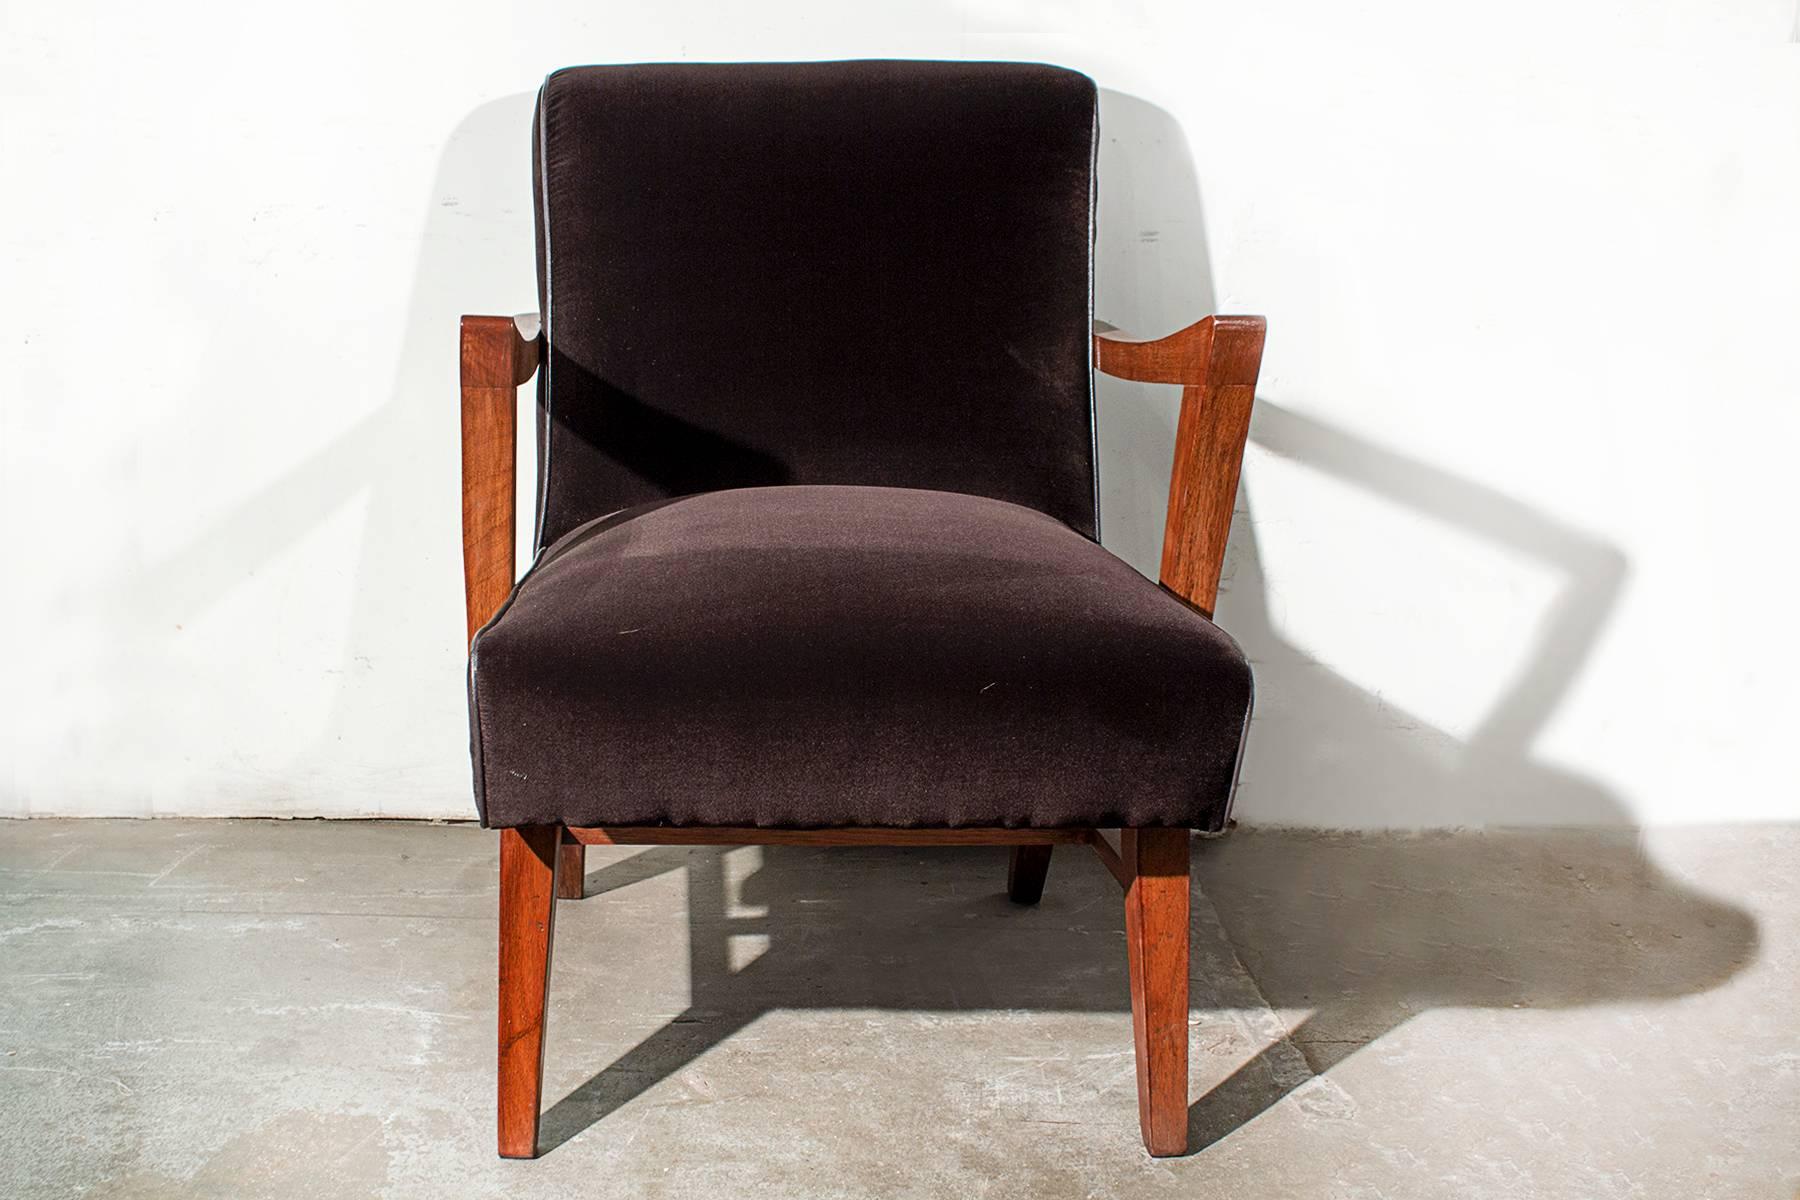 Stylish Mid-Century wood armchair in the style of Edward Wormley for Dunbar. Refinished maple frame with soft micro-velvet fabric. Super comfy.

Measures: 24.5" W x 26" D x 32" H seat height 17 1/2".